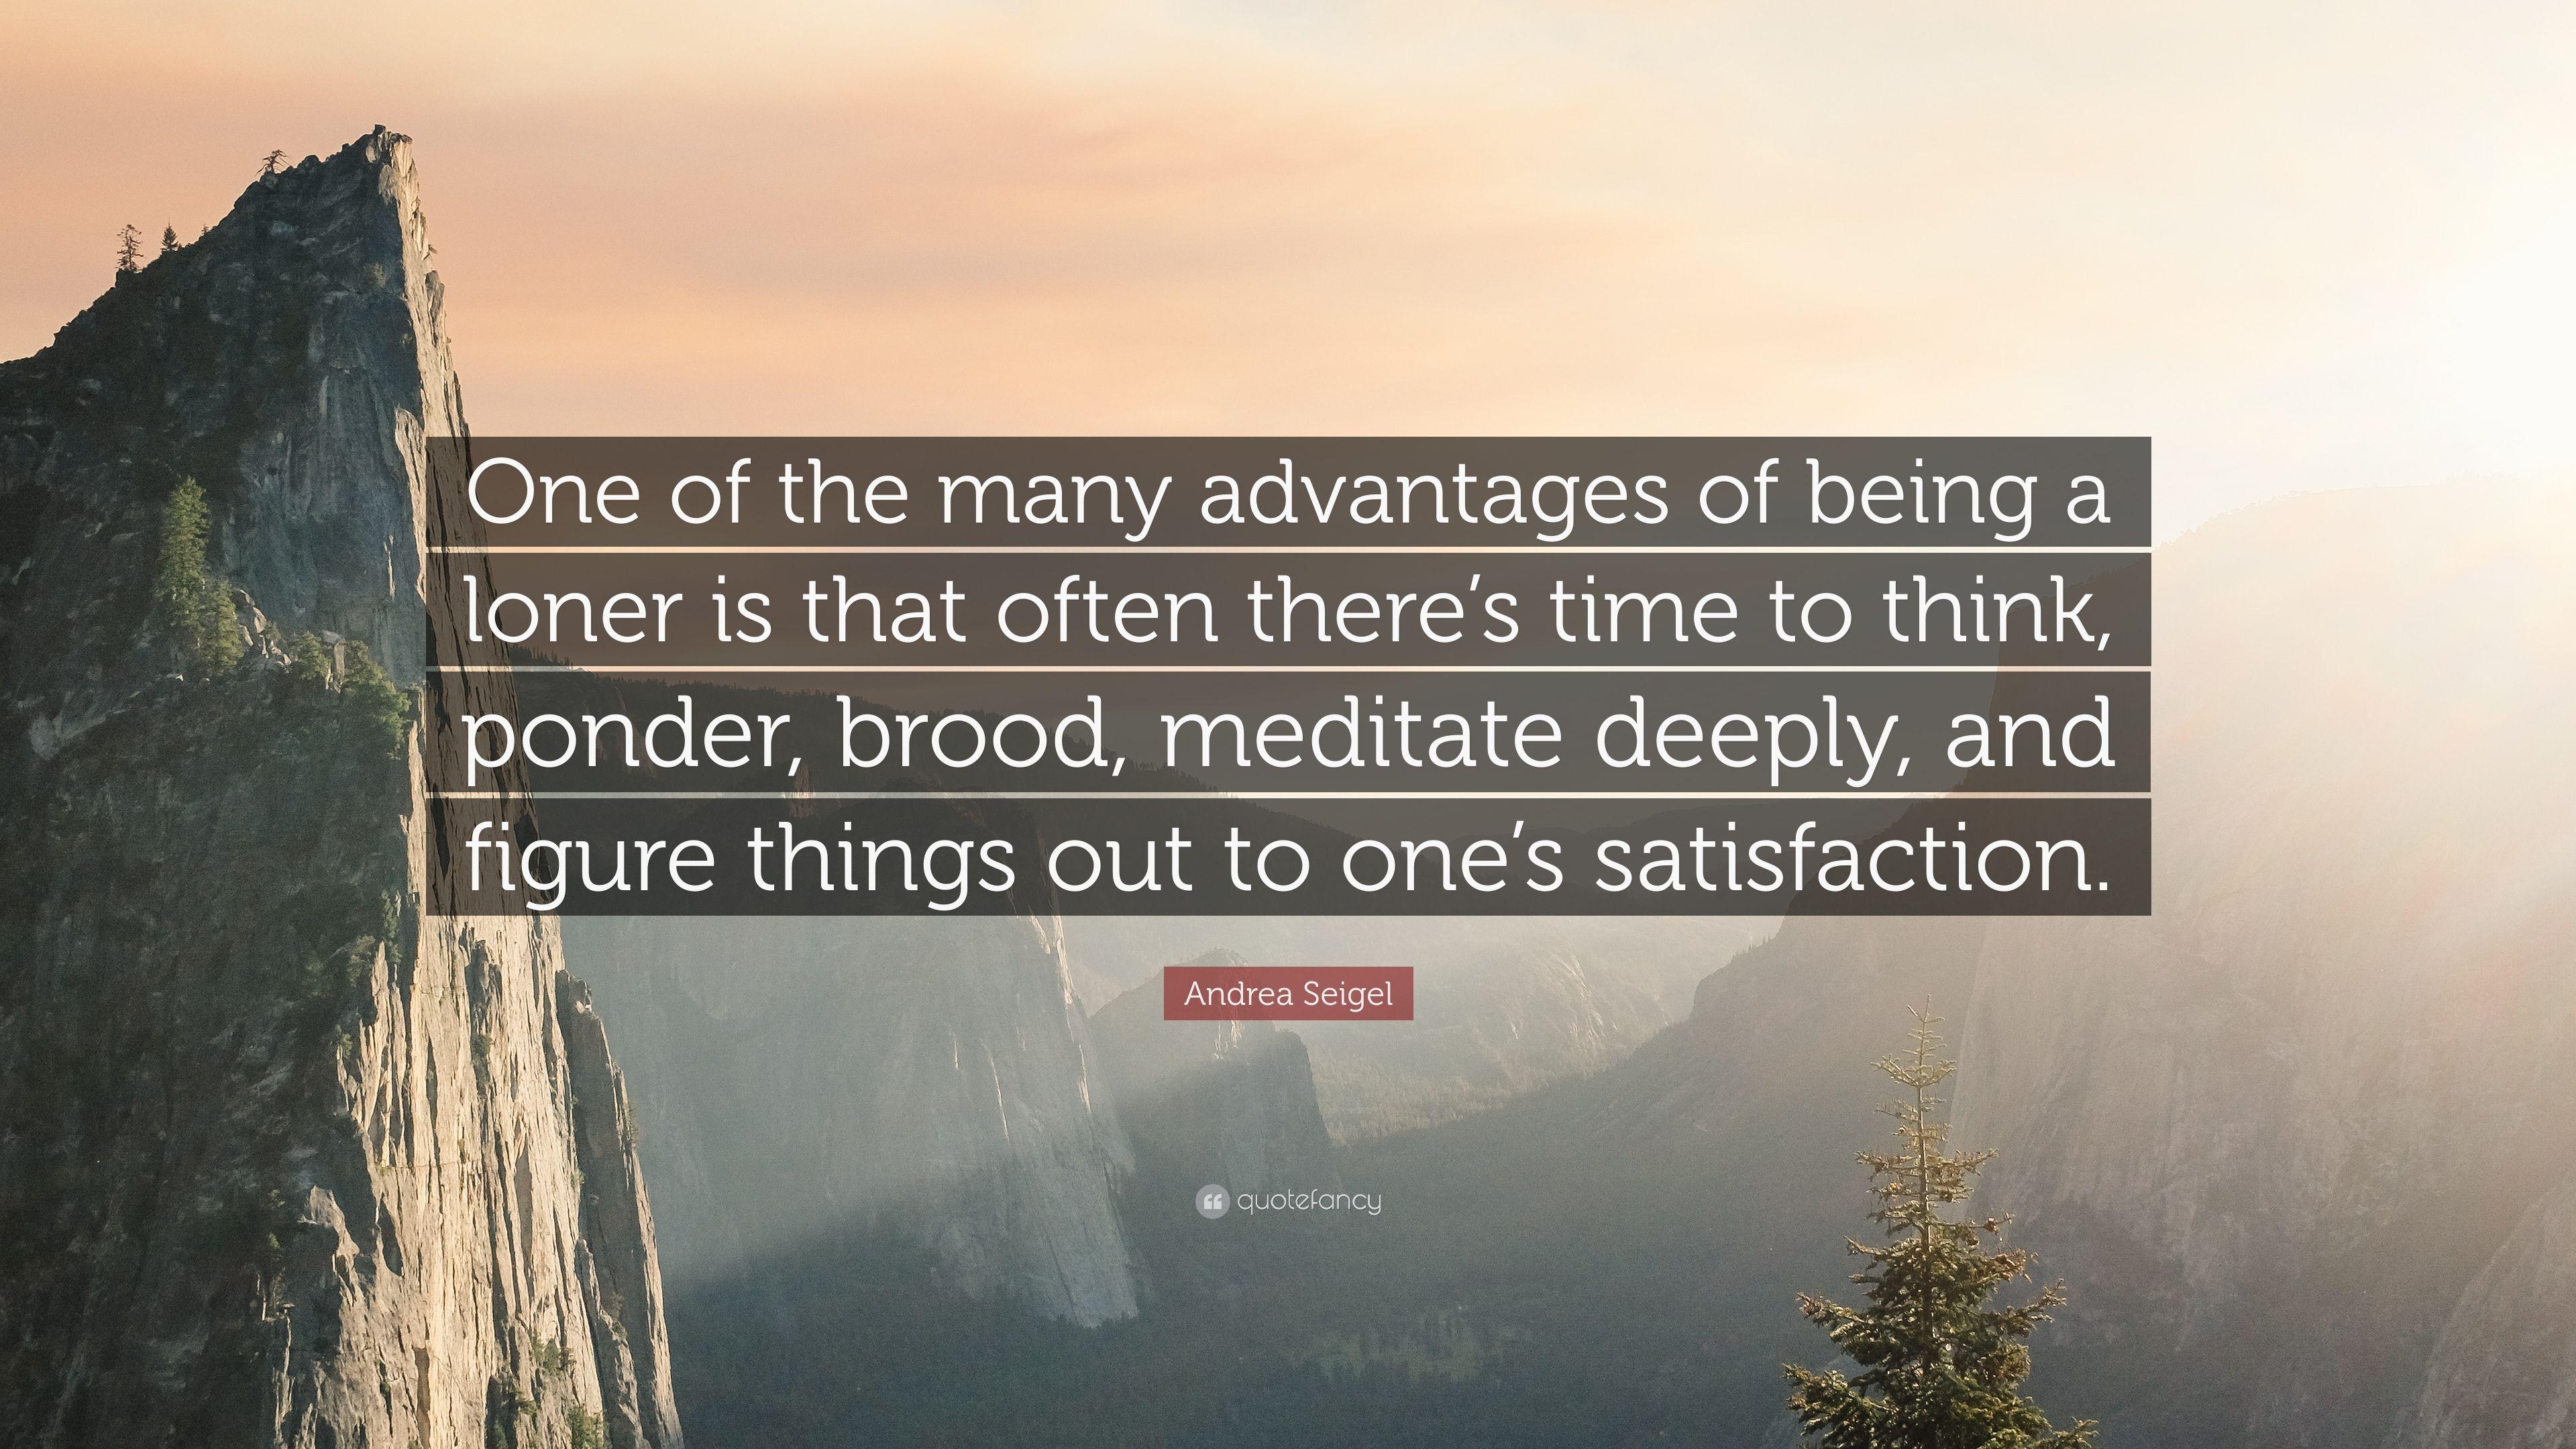 Andrea Seigel Quote: “One of the many advantages of being a loner is